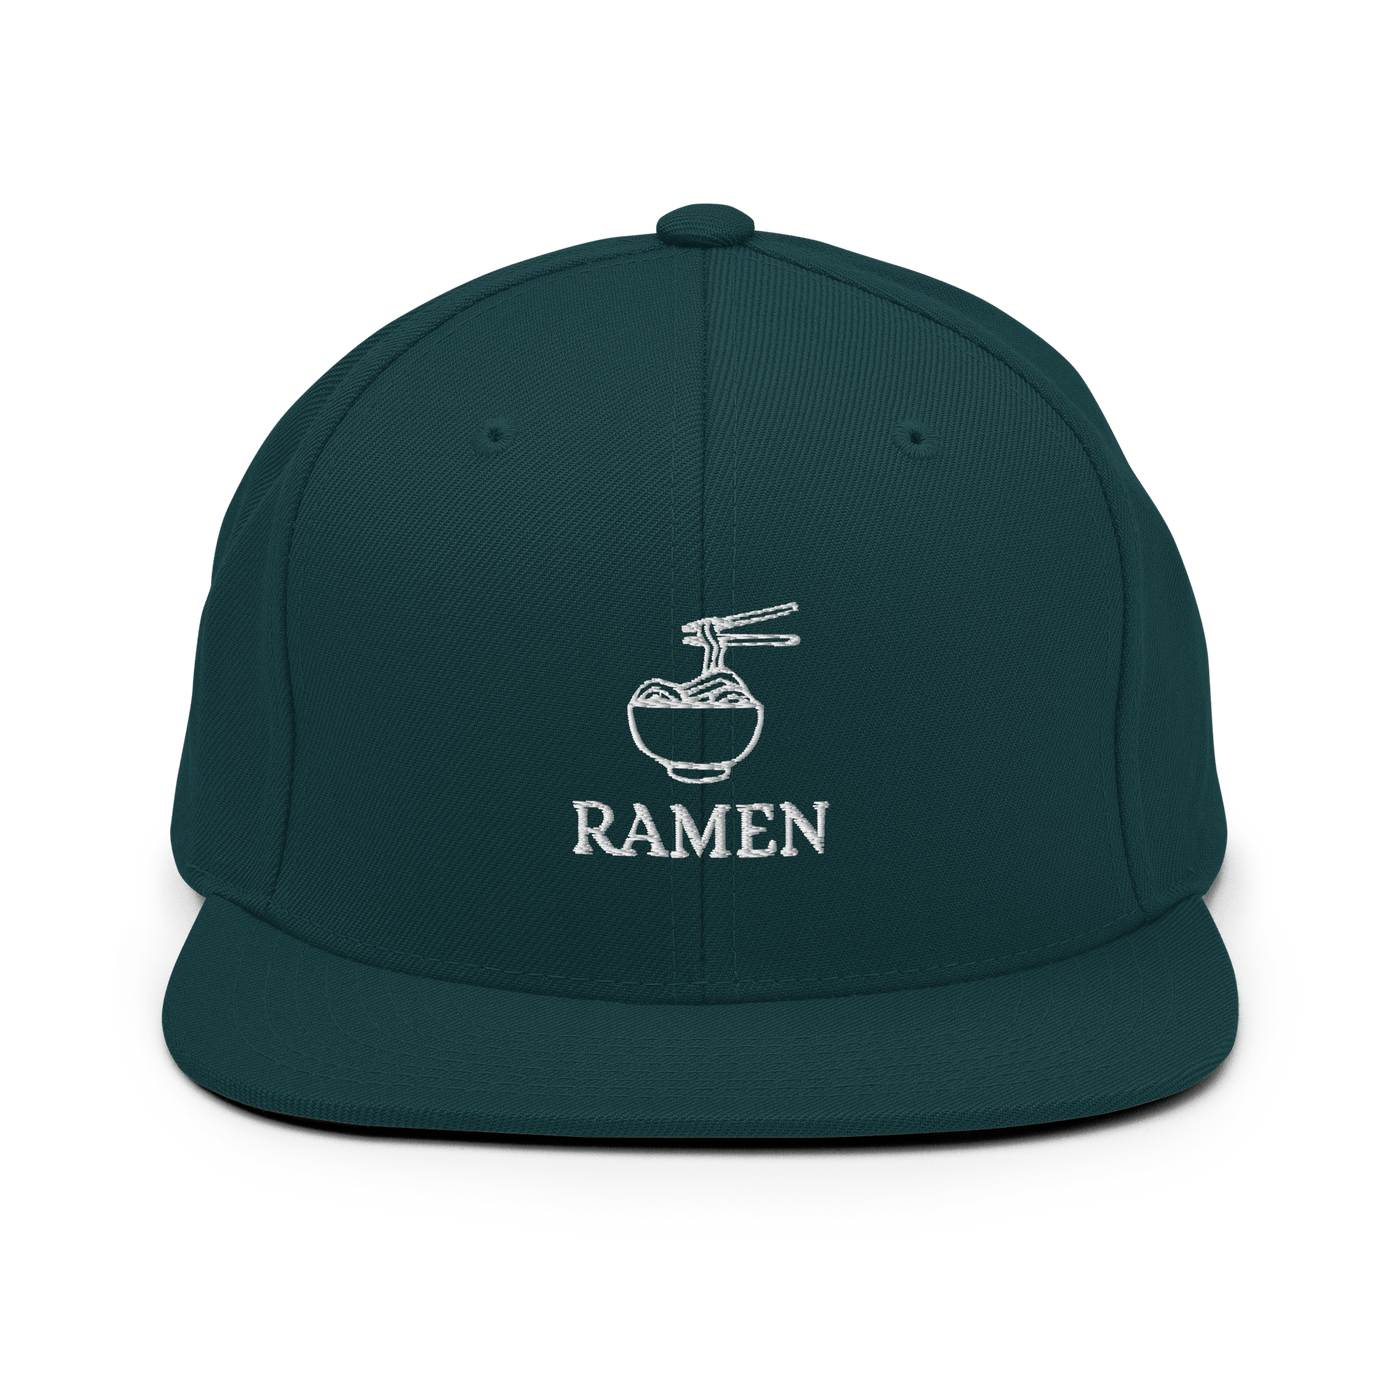 Ramen Bowl Snapback Hat - Spruce - - Just Another Cap Store